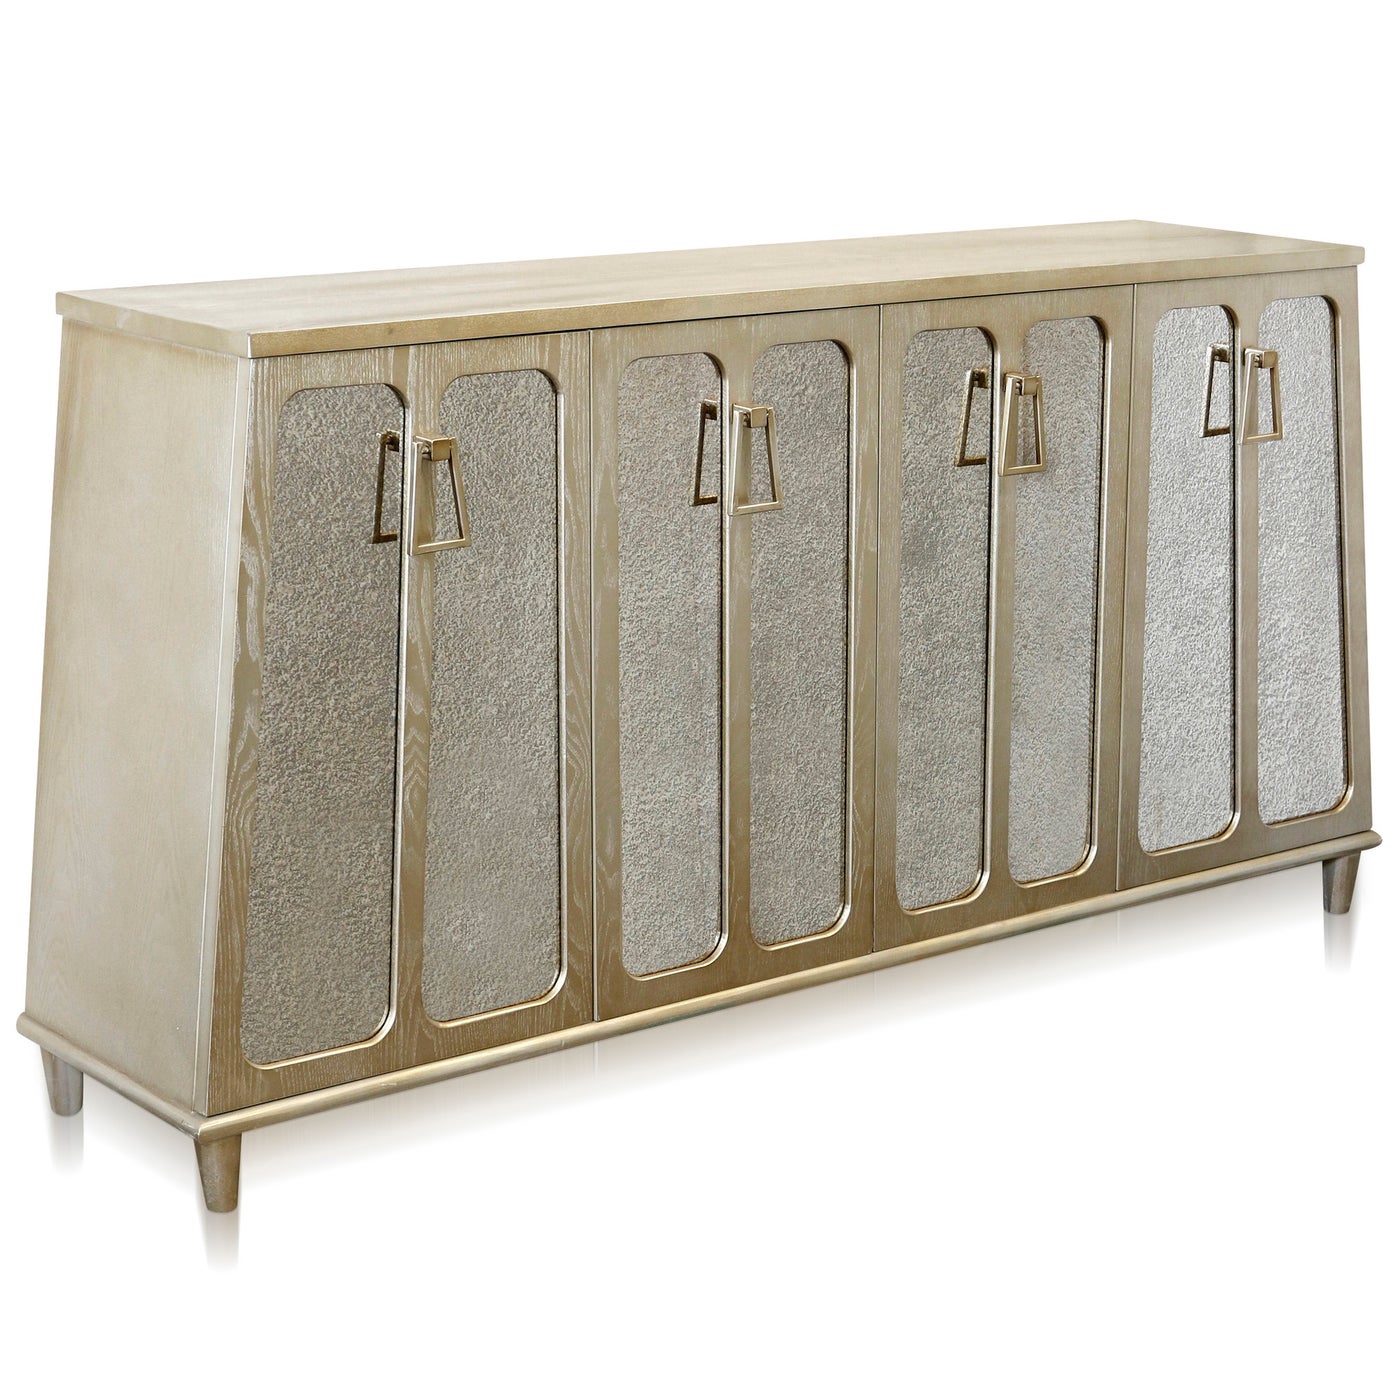 BARNES SIDEBOARD | Charcoal Champagne Finish on Hardwood with Antique Mirror | 4 Door